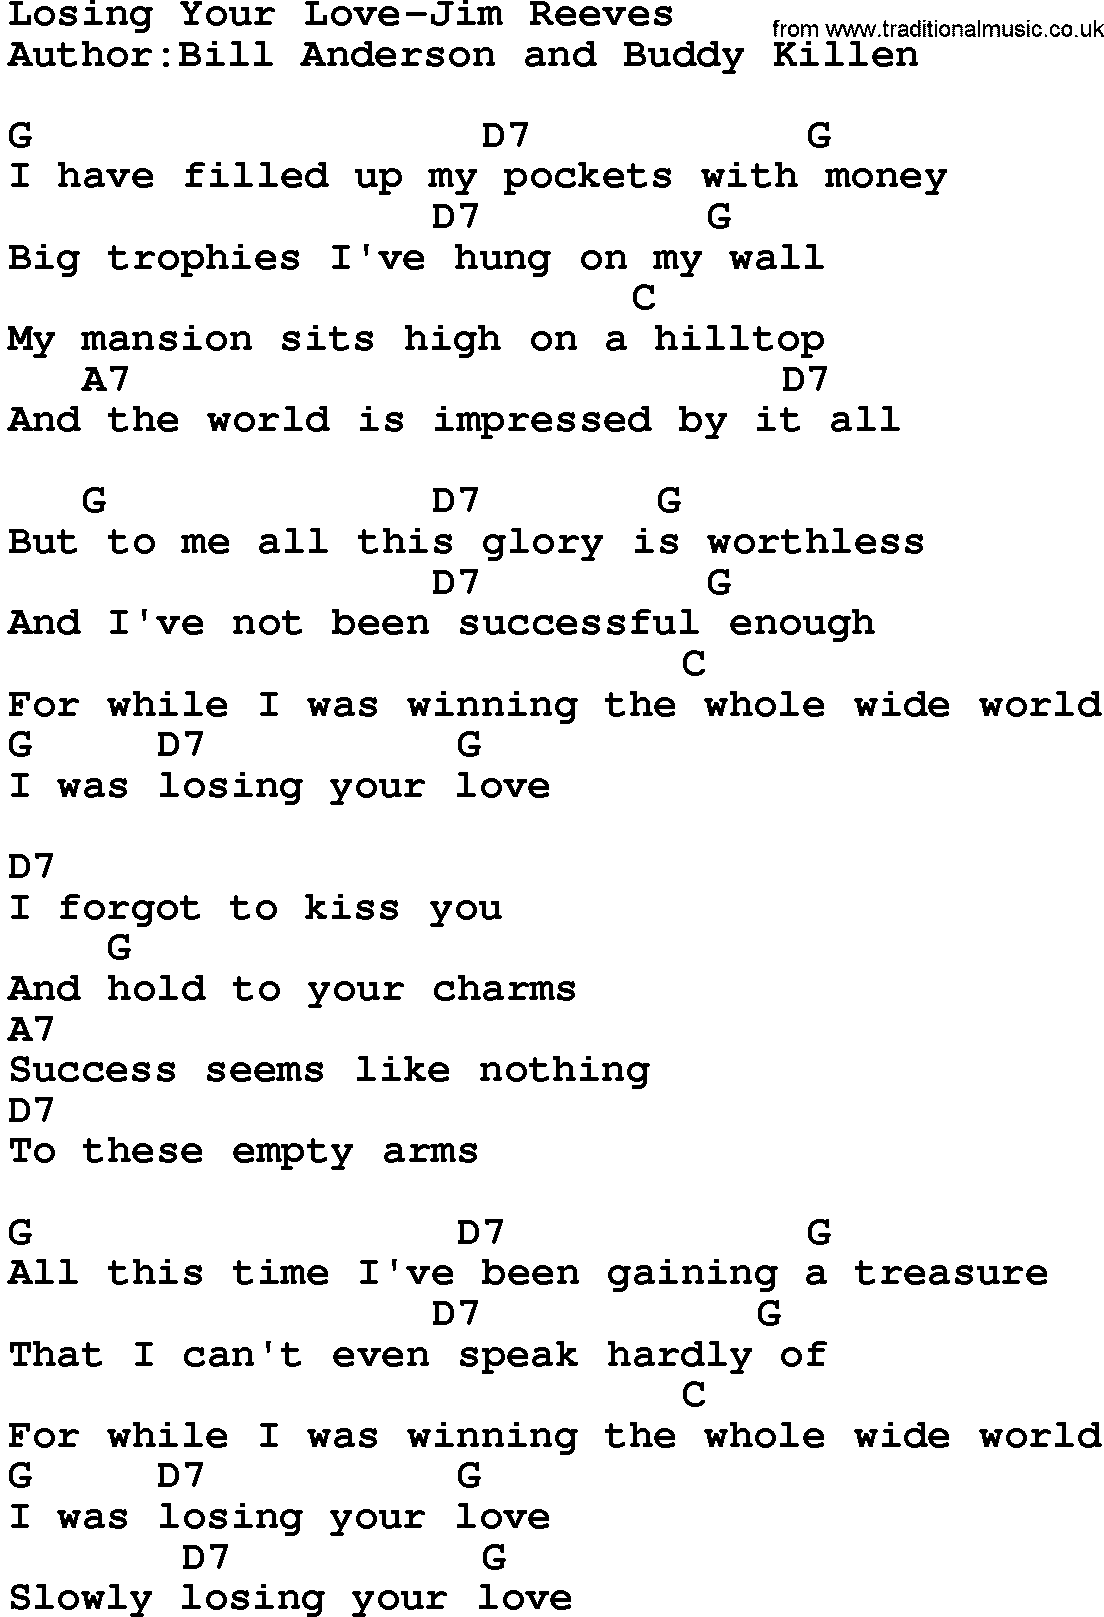 Country music song: Losing Your Love-Jim Reeves  lyrics and chords